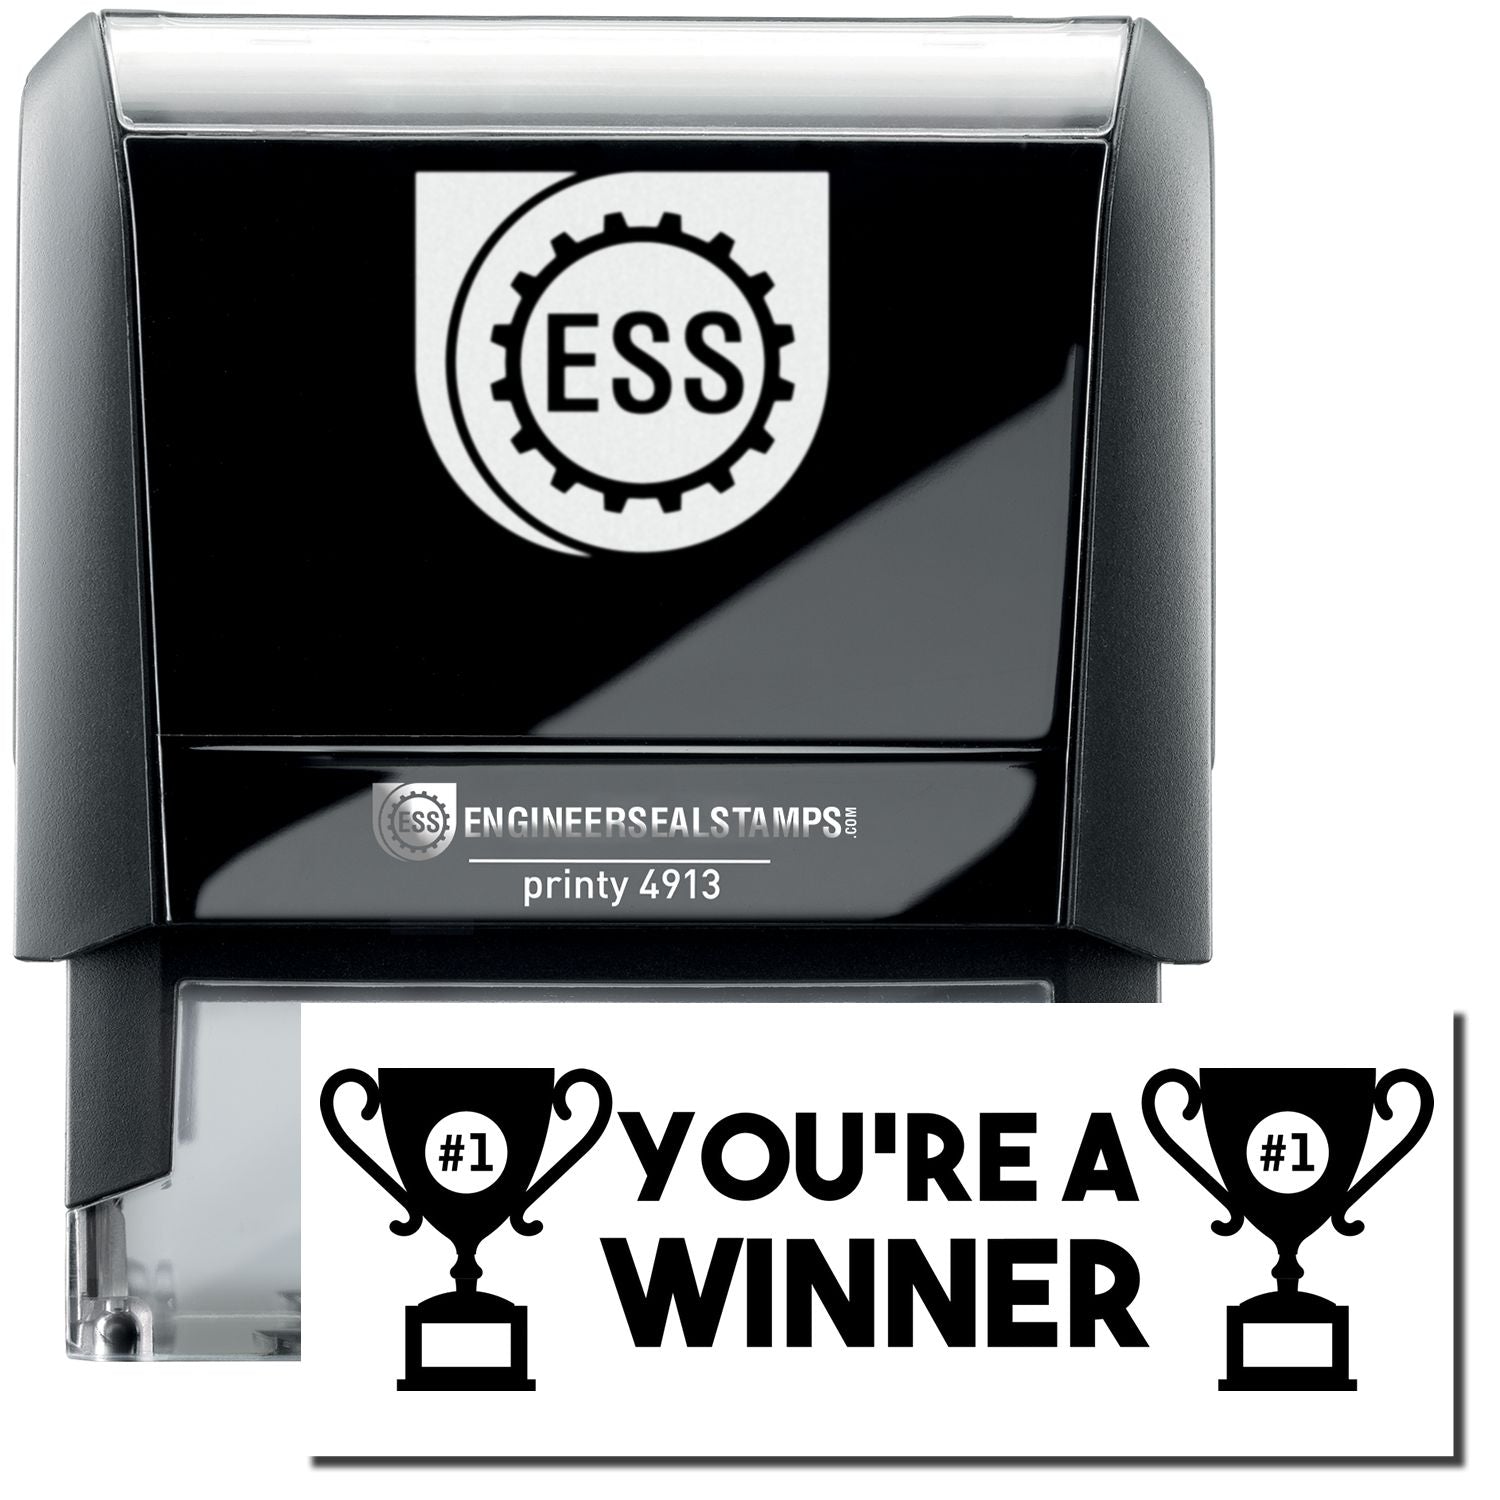 A self-inking stamp with a stamped image showing how the text "YOU'RE A WINNER" in a large bold font with images of a trophy with #1 inside on each side is displayed after stamping.